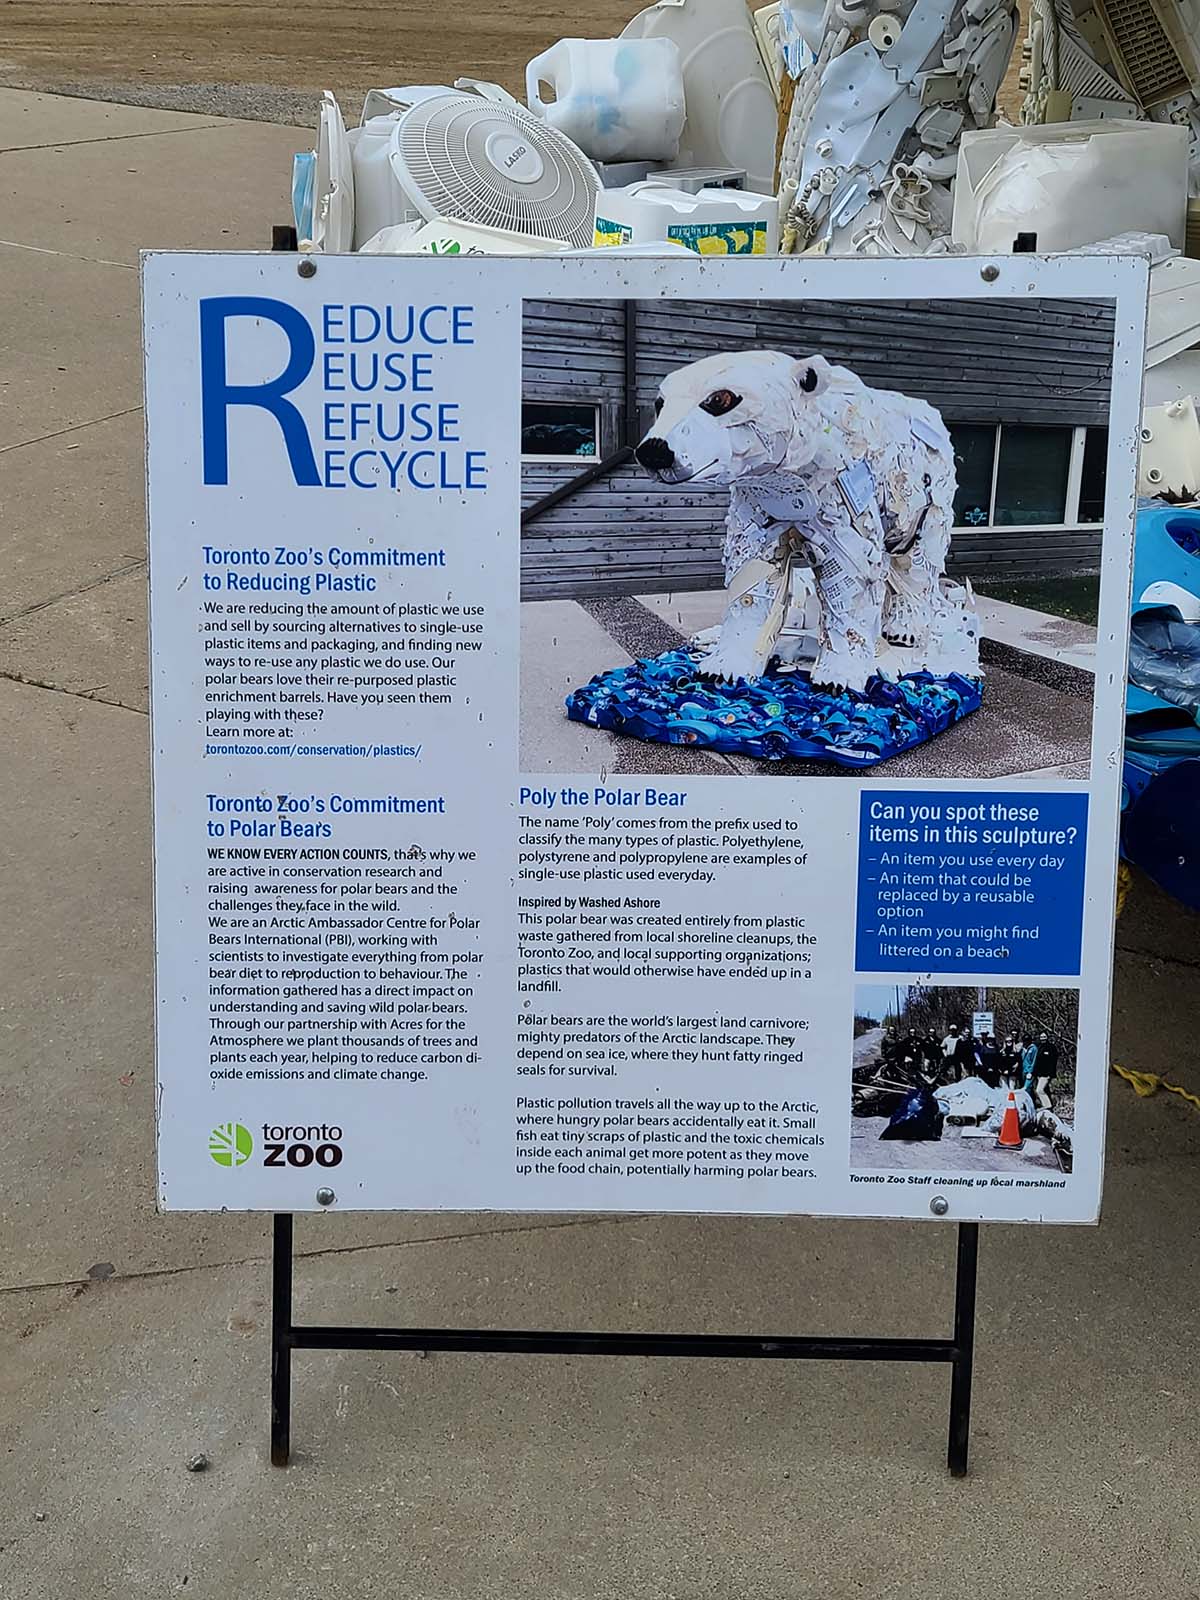 A polar bear made of recyclable items like bottles.